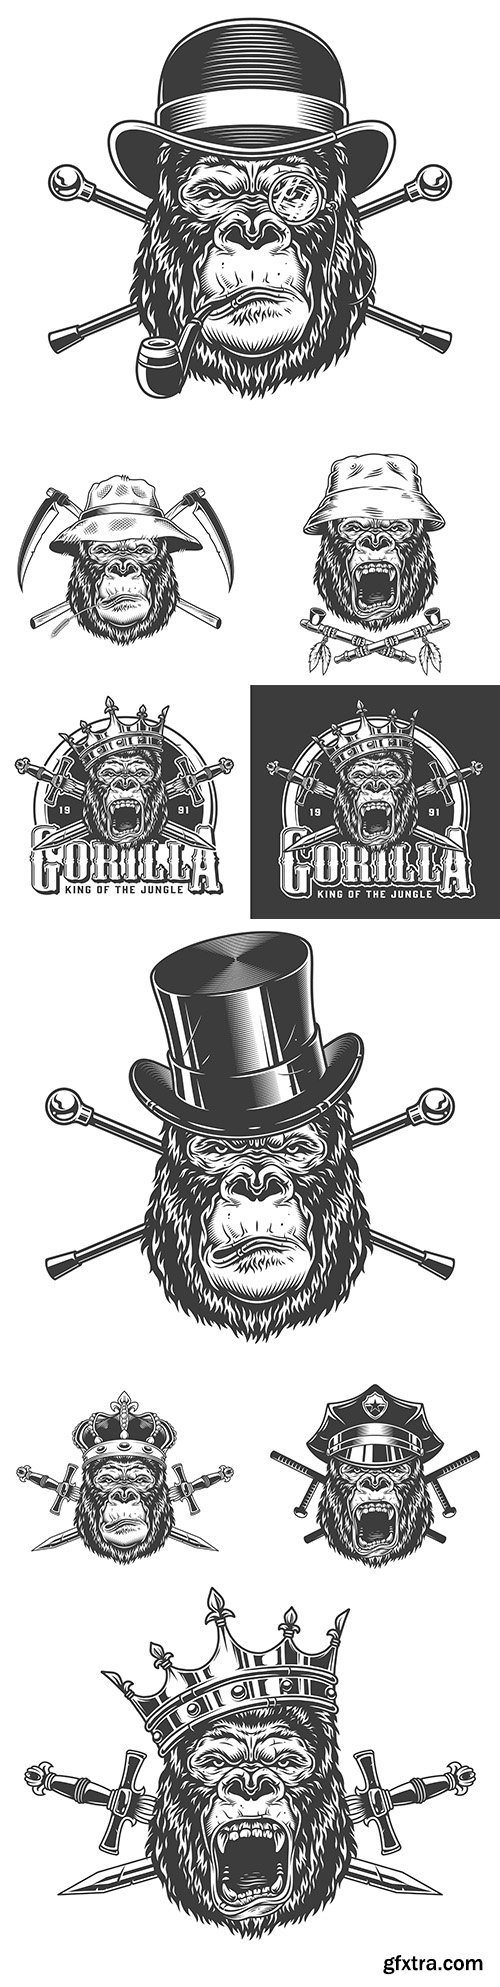 Head gorilla in hat with grunge objects design illustrations
